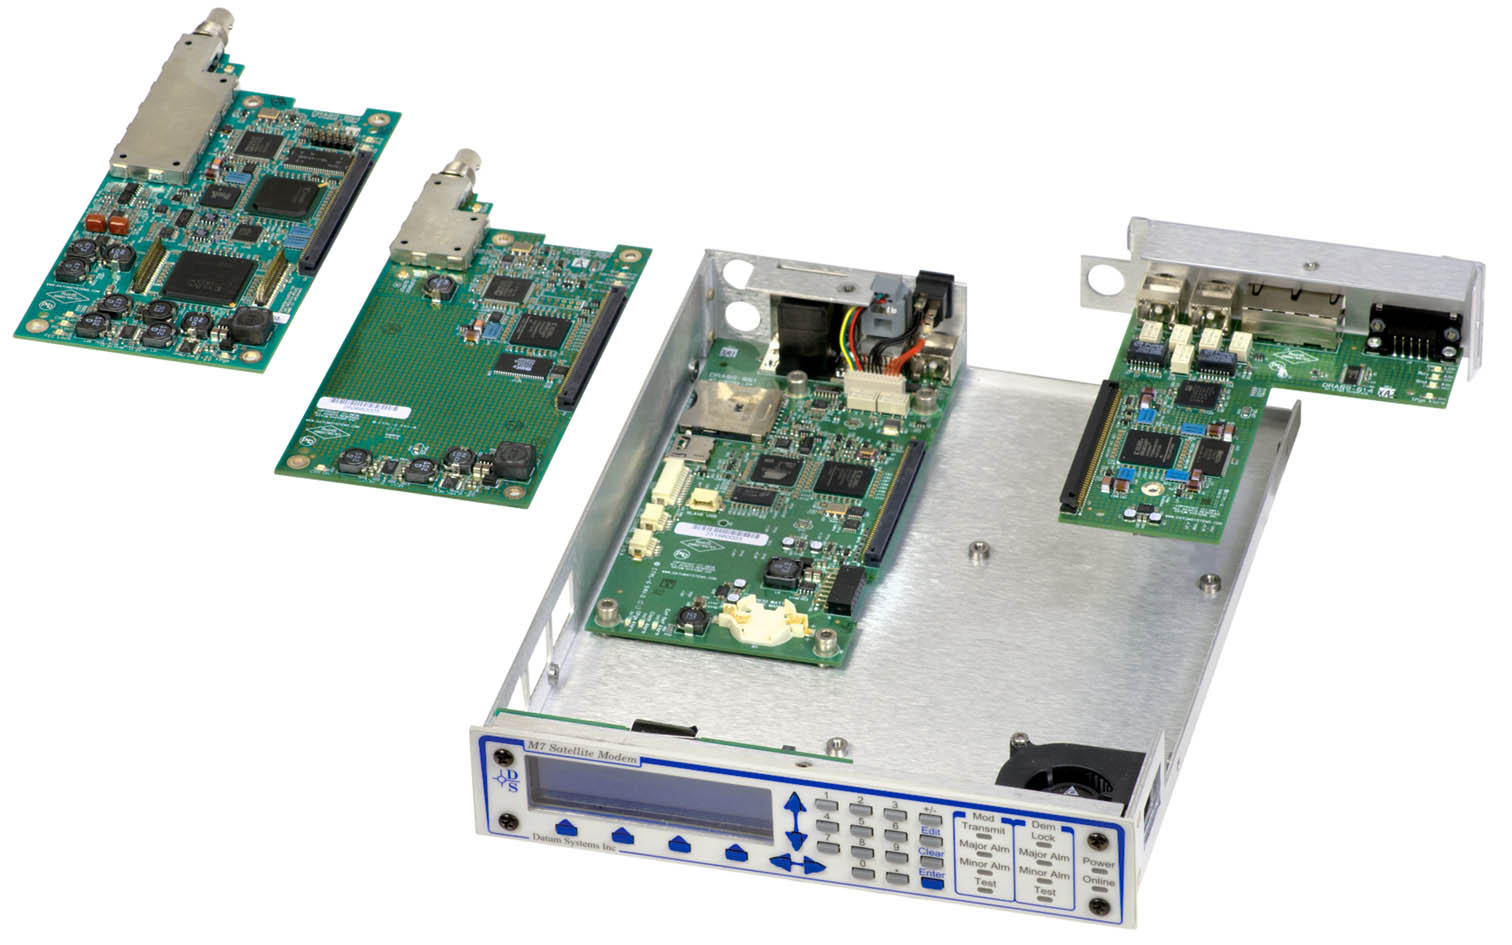 Studio photo of Datum satelite modem in exploded view showind four circuit boards